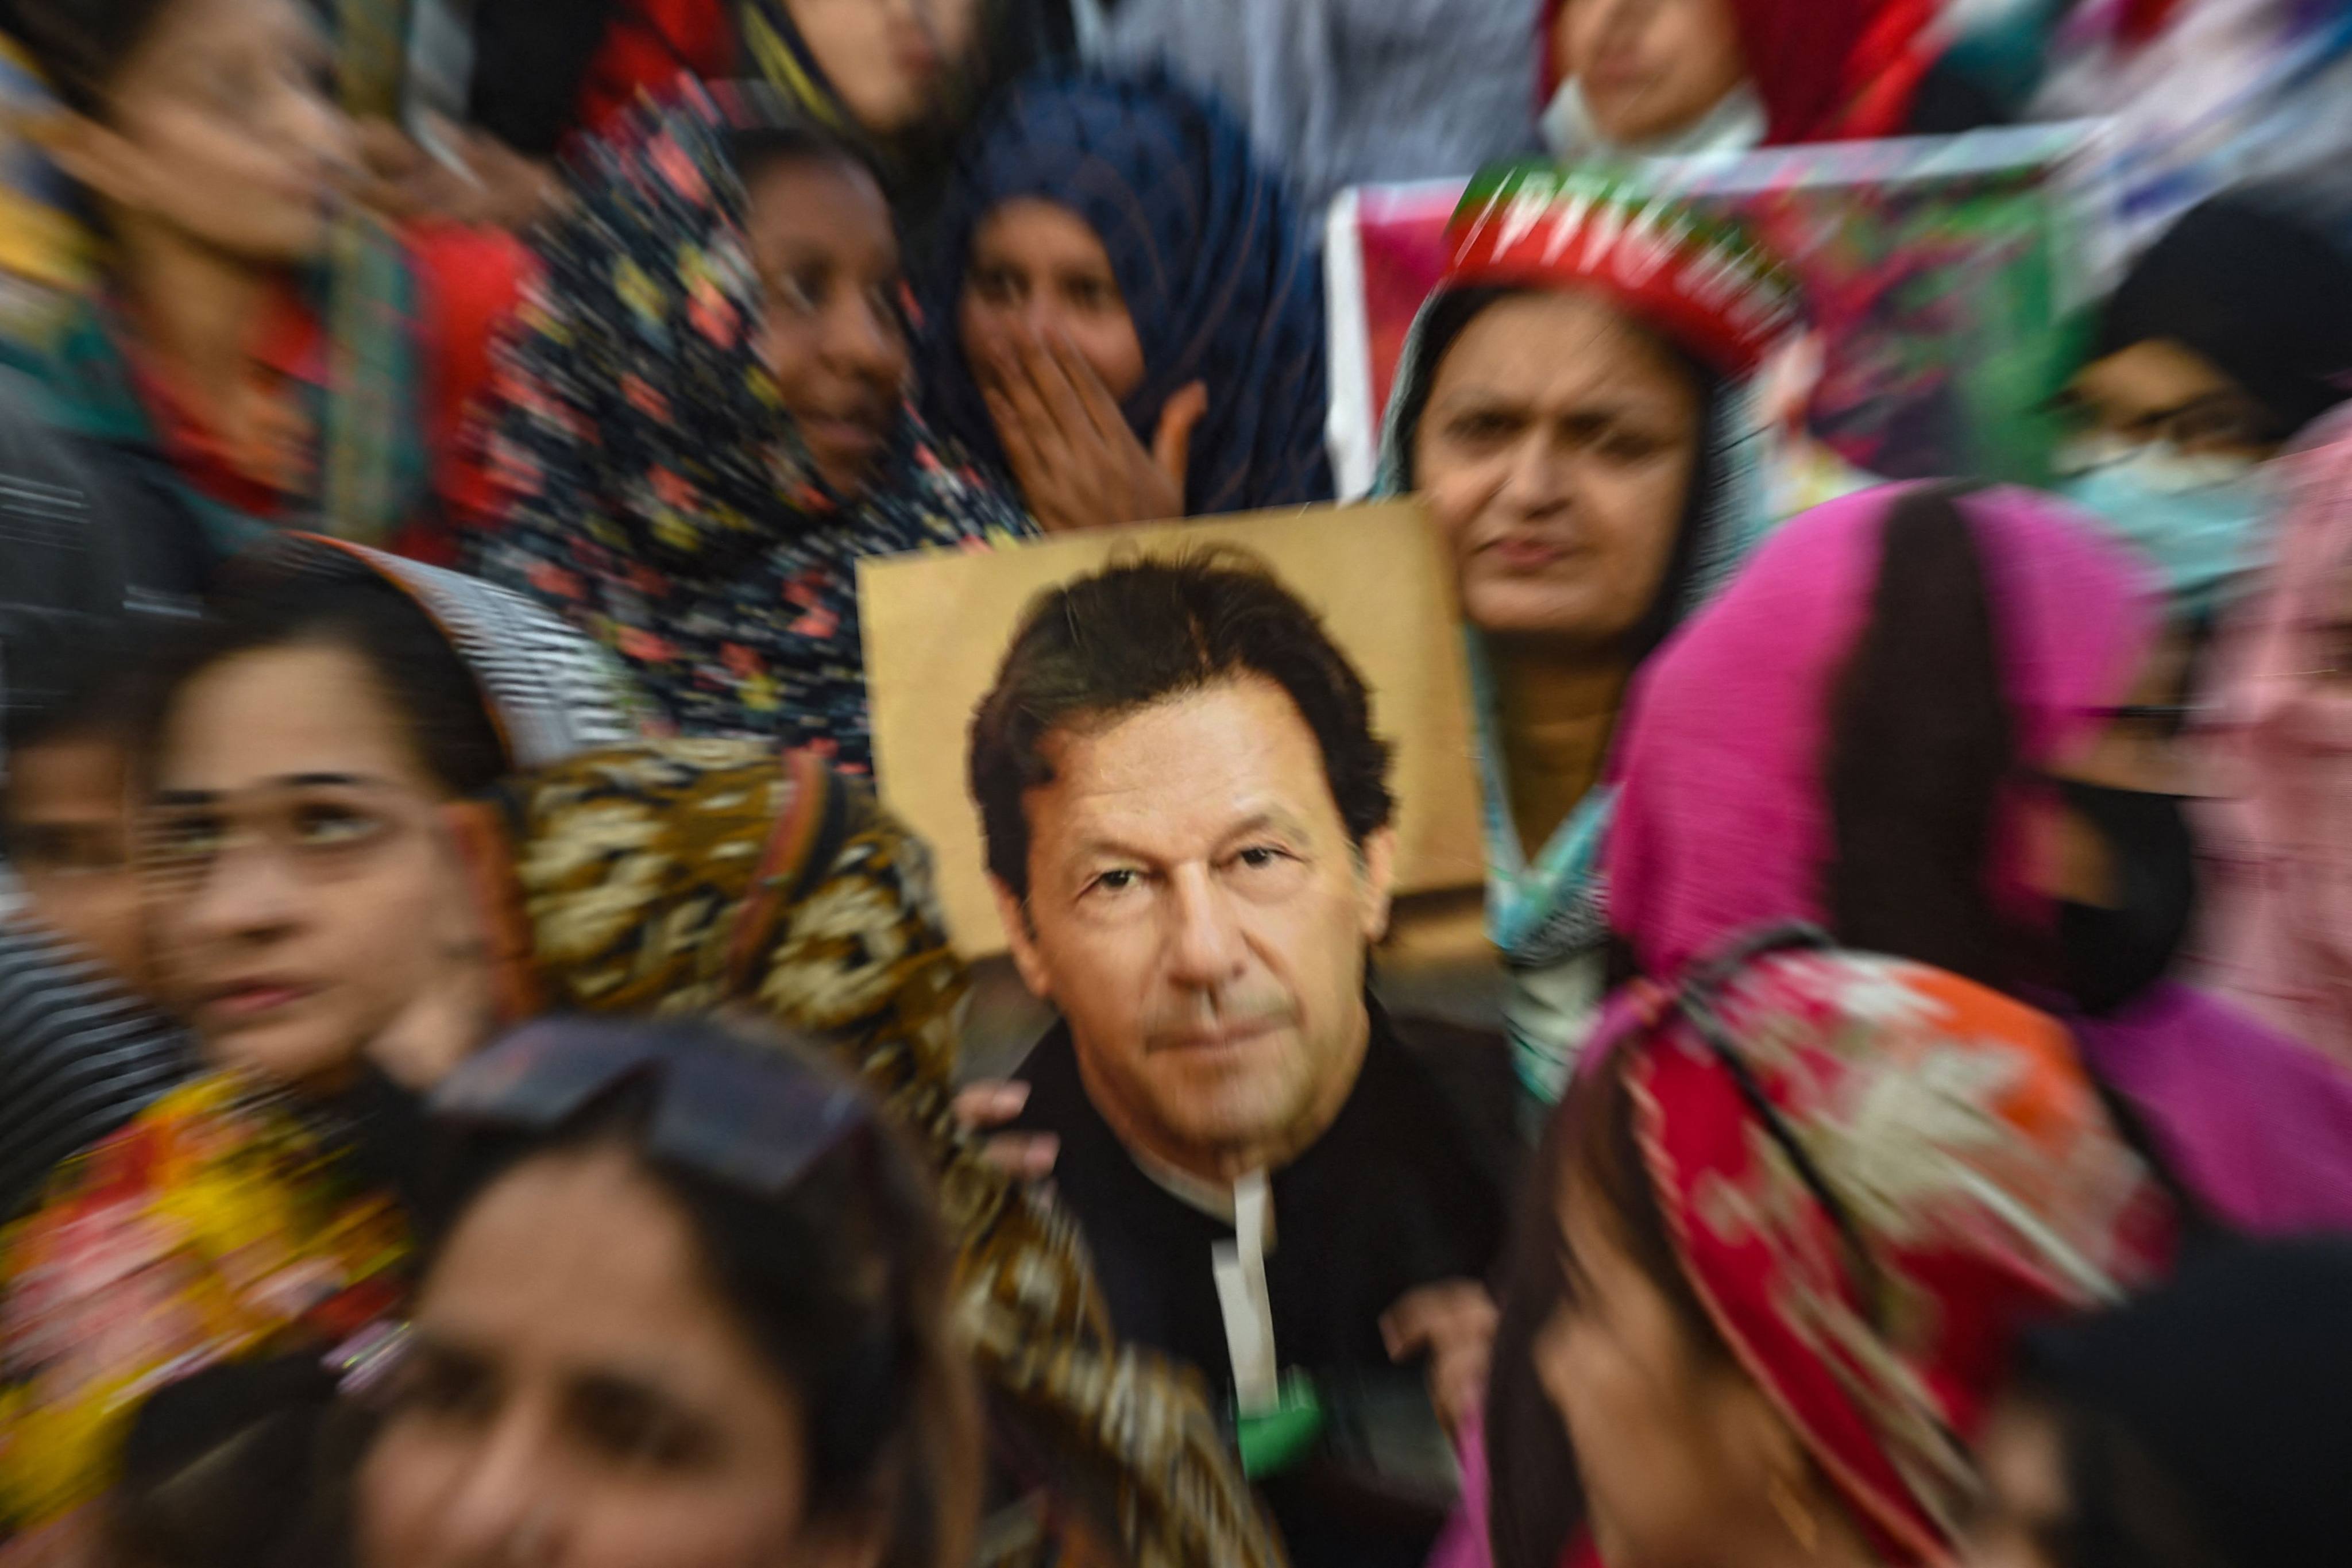 Supporters of Pakistan’s former prime minister Imran Khan gather during a protest in Karachi last month demanding the release of party workers from Khan’s Pakistan Tehreek-e-Insaf who were arrested following recent clashes with police. Photo: AFP